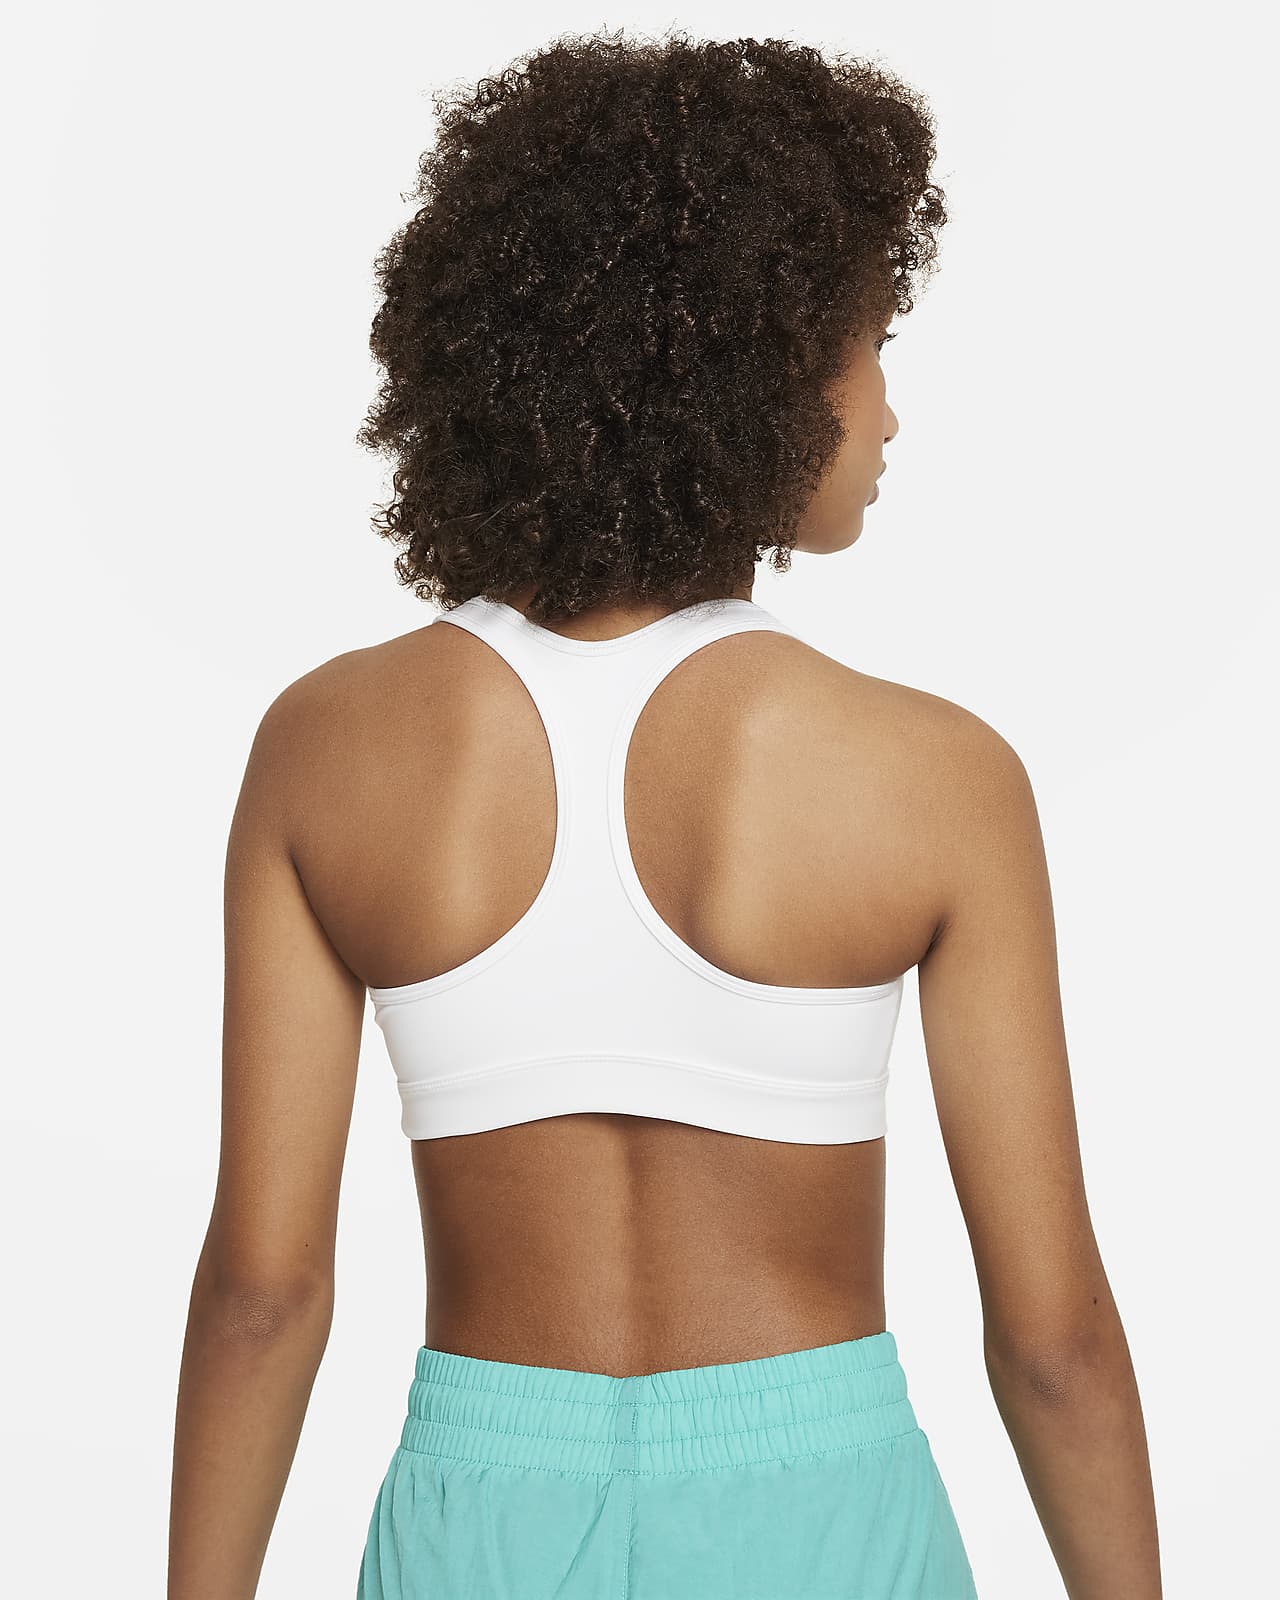 Nike Releases New Motion Adapt Sports Bra